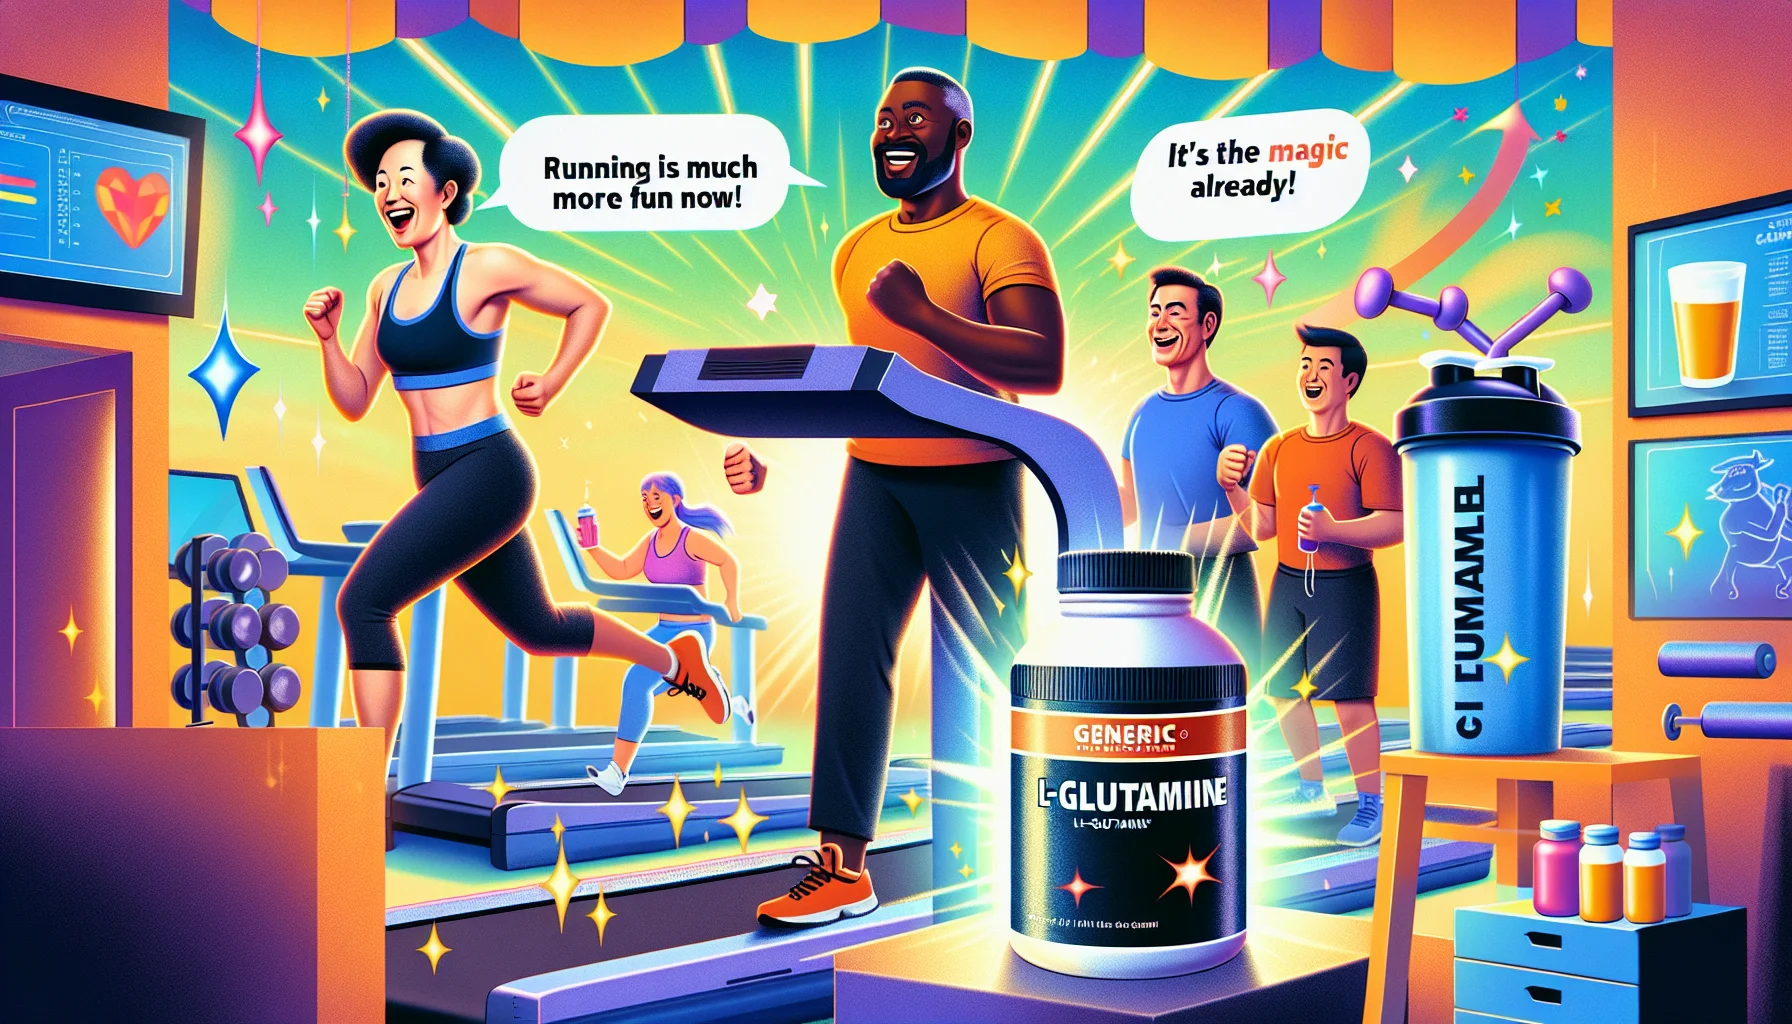 Create a realistic image featuring a generic brand of L-Glutamine. The scene takes place in a bustling, colorful gym. To the left, a middle-aged South Asian man runs on a treadmill with an expression of pure joy on his face. He has speaking bubbles that say 'Running is much more fun now!'. Next to the treadmill, a table with a container of the L-Glutamine supplement stands, with a noticeable glow surrounding it. A Hispanic woman is using the supplement, smiling widely as she shakes her protein shaker. She is wearing workout attire and her speech bubble reads: 'It's the magic powder!' On the right, a Black male is lifting weights with ease and his speaking bubble says 'Feeling lighter already!' These gym-goers are clearly having a great time, implying the effectiveness of the supplement.